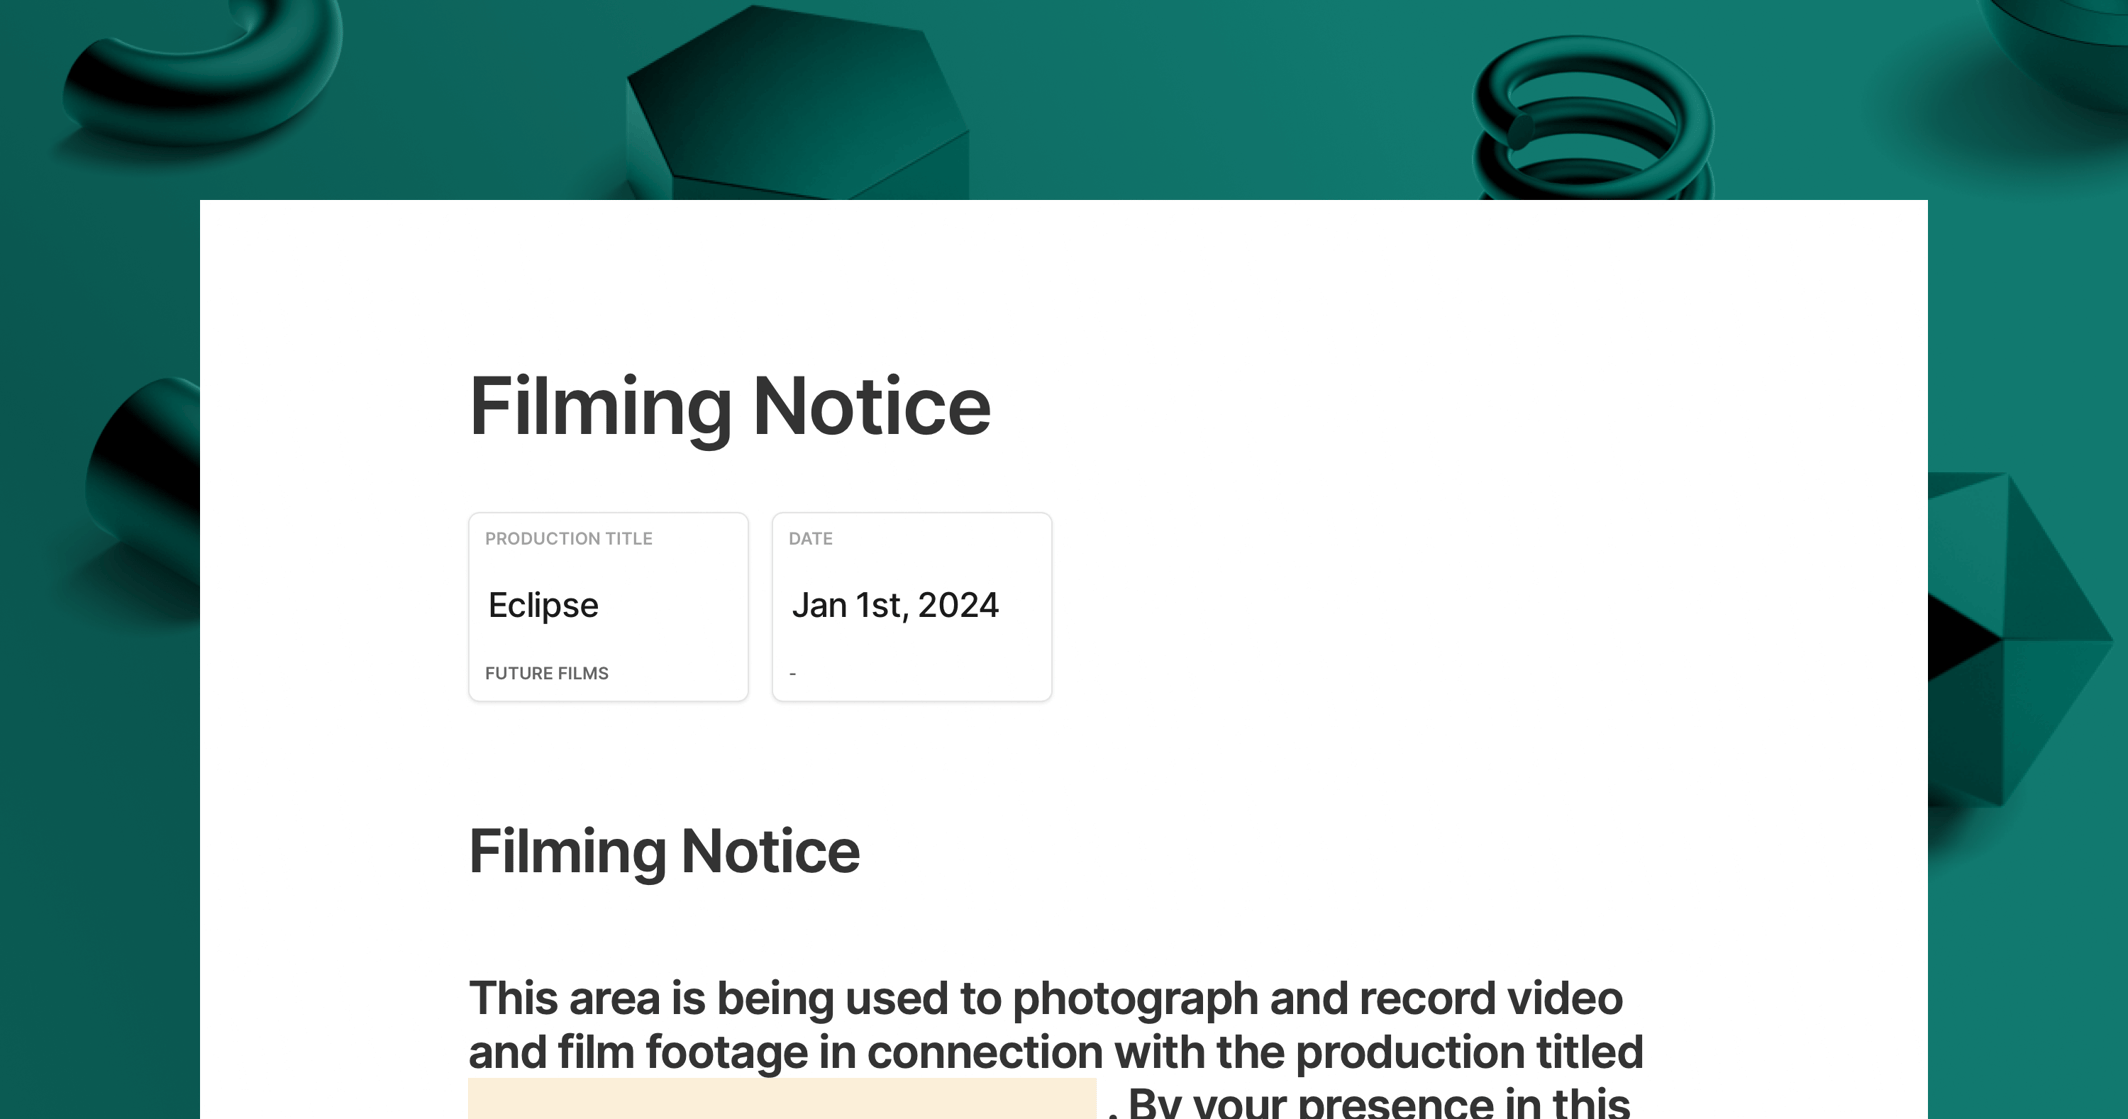 https://3389140.fs1.hubspotusercontent-na1.net/hubfs/3389140/filming%20notice%20cover.png